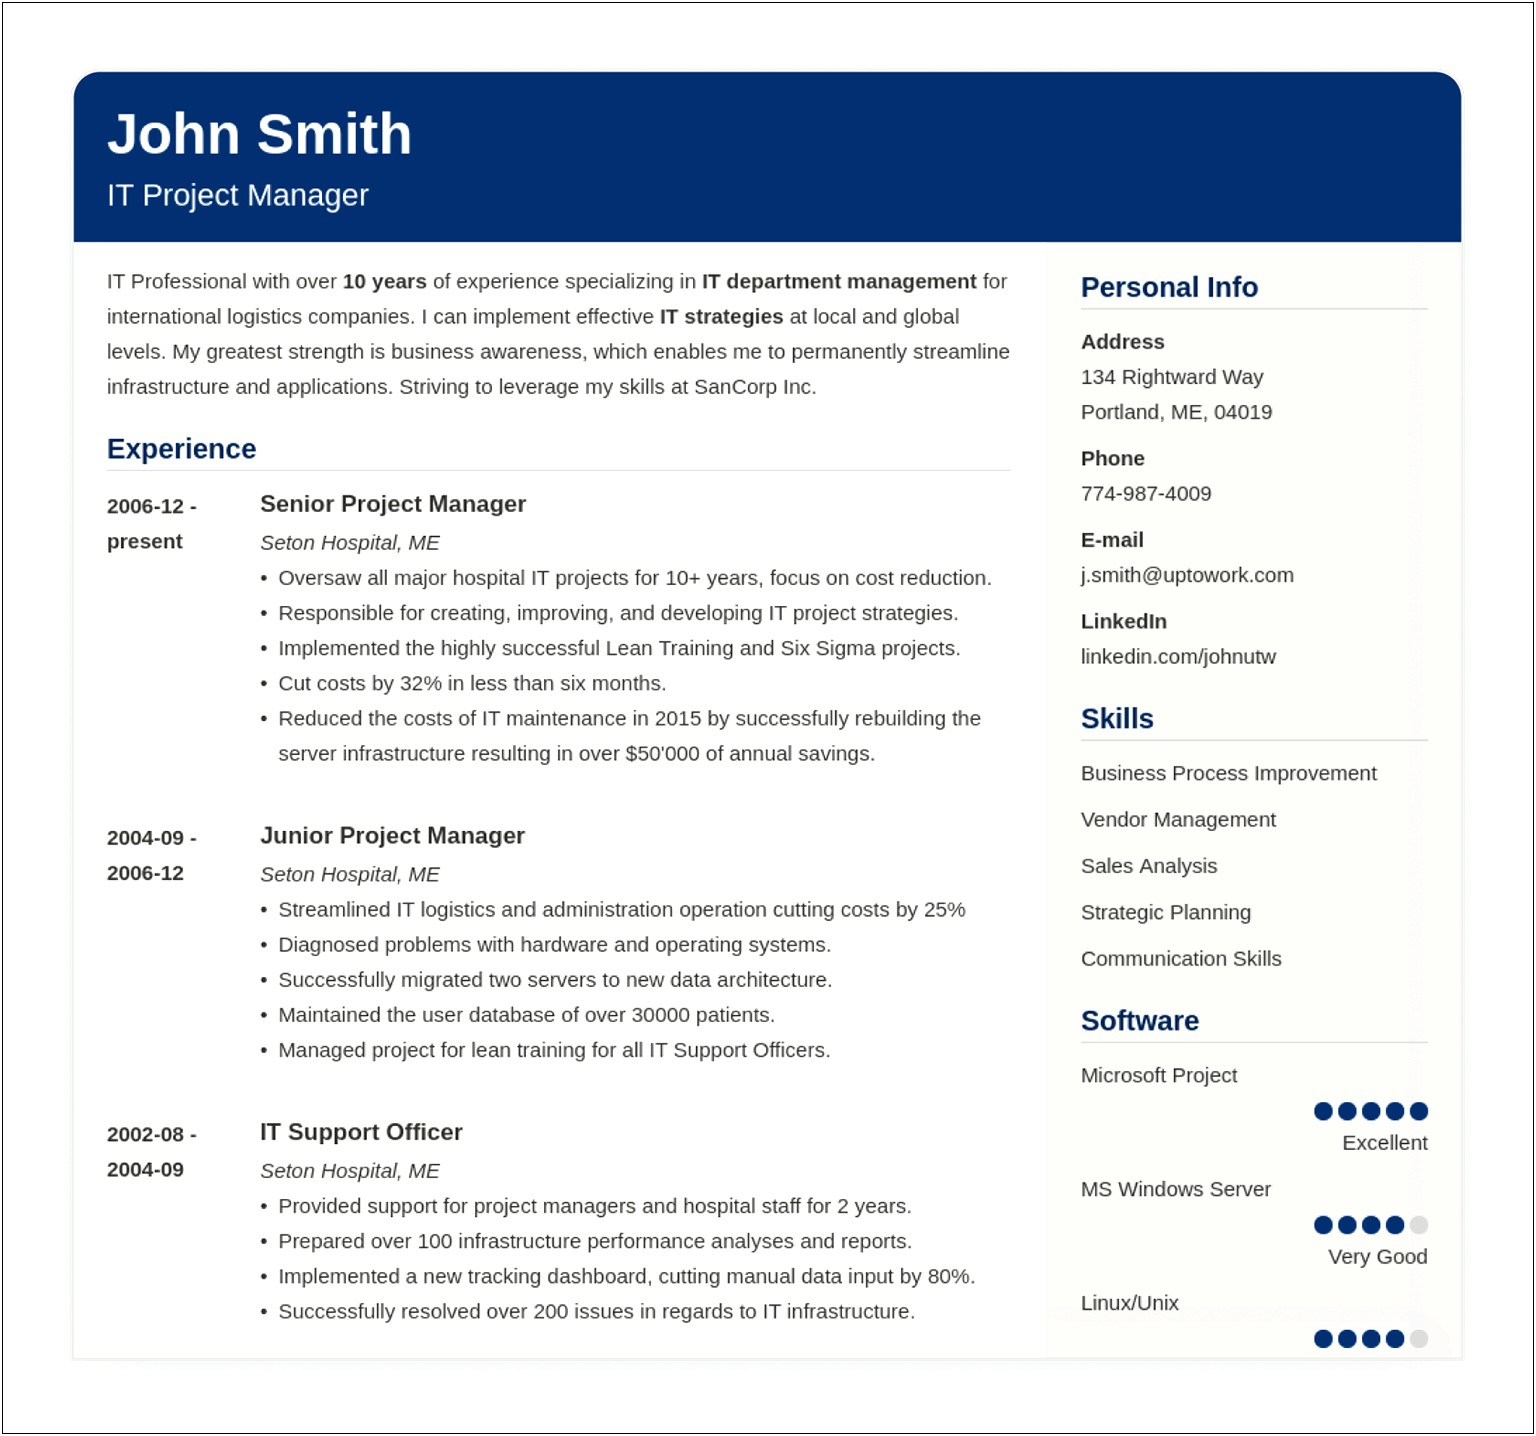 Example Of A Job Application Resume